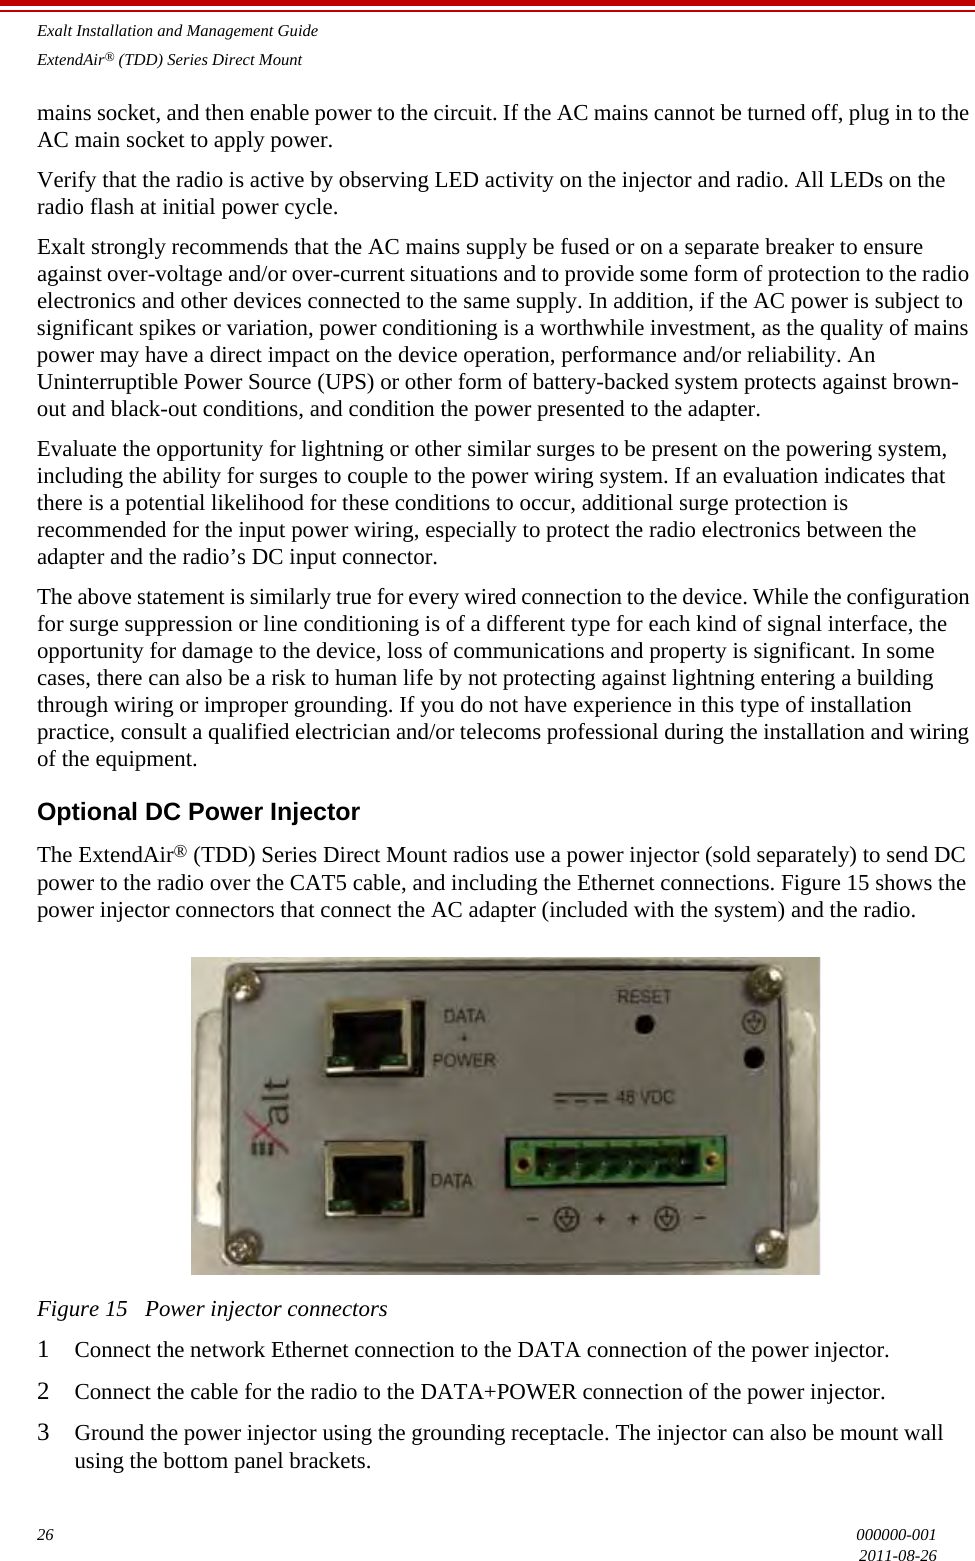 Exalt Installation and Management GuideExtendAir® (TDD) Series Direct Mount26 000000-0012011-08-26mains socket, and then enable power to the circuit. If the AC mains cannot be turned off, plug in to the AC main socket to apply power. Verify that the radio is active by observing LED activity on the injector and radio. All LEDs on the radio flash at initial power cycle.Exalt strongly recommends that the AC mains supply be fused or on a separate breaker to ensure against over-voltage and/or over-current situations and to provide some form of protection to the radio electronics and other devices connected to the same supply. In addition, if the AC power is subject to significant spikes or variation, power conditioning is a worthwhile investment, as the quality of mains power may have a direct impact on the device operation, performance and/or reliability. An Uninterruptible Power Source (UPS) or other form of battery-backed system protects against brown-out and black-out conditions, and condition the power presented to the adapter.Evaluate the opportunity for lightning or other similar surges to be present on the powering system, including the ability for surges to couple to the power wiring system. If an evaluation indicates that there is a potential likelihood for these conditions to occur, additional surge protection is recommended for the input power wiring, especially to protect the radio electronics between the adapter and the radio’s DC input connector.The above statement is similarly true for every wired connection to the device. While the configuration for surge suppression or line conditioning is of a different type for each kind of signal interface, the opportunity for damage to the device, loss of communications and property is significant. In some cases, there can also be a risk to human life by not protecting against lightning entering a building through wiring or improper grounding. If you do not have experience in this type of installation practice, consult a qualified electrician and/or telecoms professional during the installation and wiring of the equipment.Optional DC Power InjectorThe ExtendAir® (TDD) Series Direct Mount radios use a power injector (sold separately) to send DC power to the radio over the CAT5 cable, and including the Ethernet connections. Figure 15 shows the power injector connectors that connect the AC adapter (included with the system) and the radio.Figure 15   Power injector connectors1Connect the network Ethernet connection to the DATA connection of the power injector. 2Connect the cable for the radio to the DATA+POWER connection of the power injector.3Ground the power injector using the grounding receptacle. The injector can also be mount wall using the bottom panel brackets. 